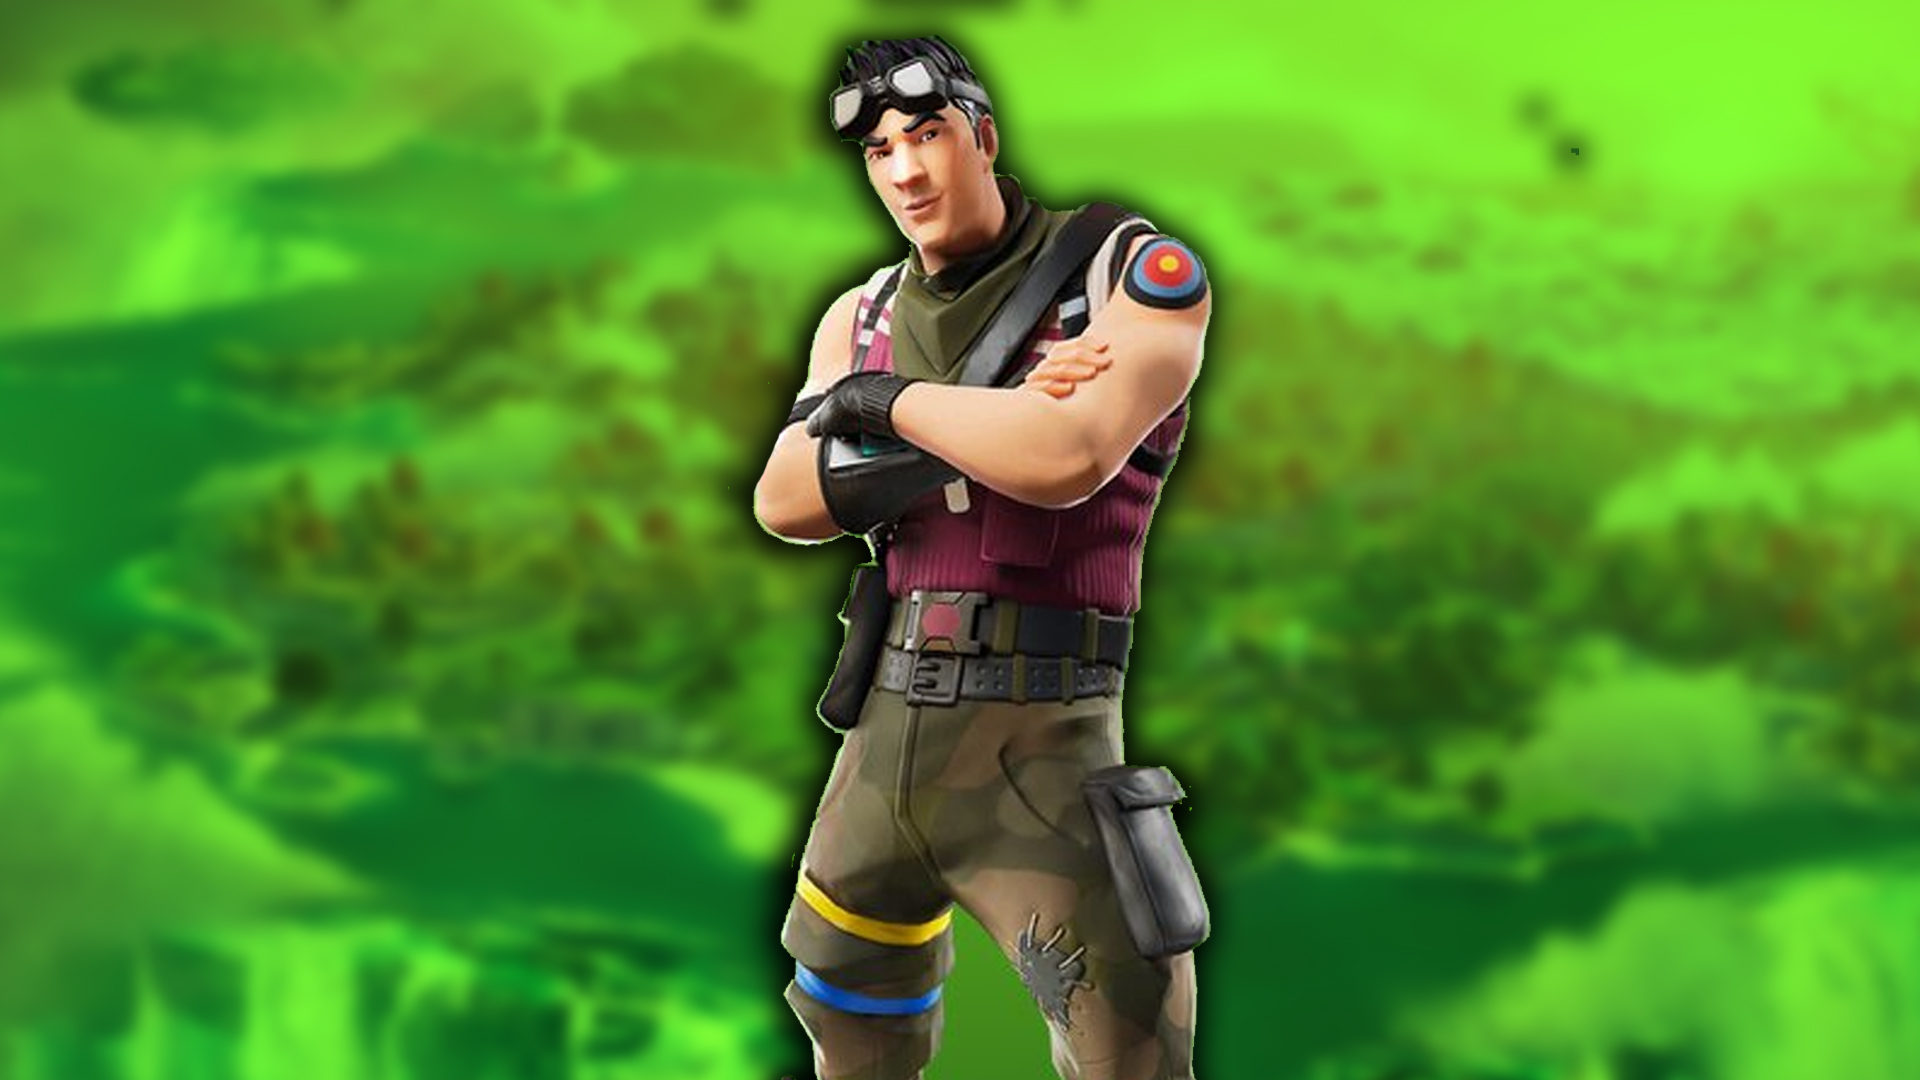 Sureshot Fornite skin is finally back after a four year
hiatus